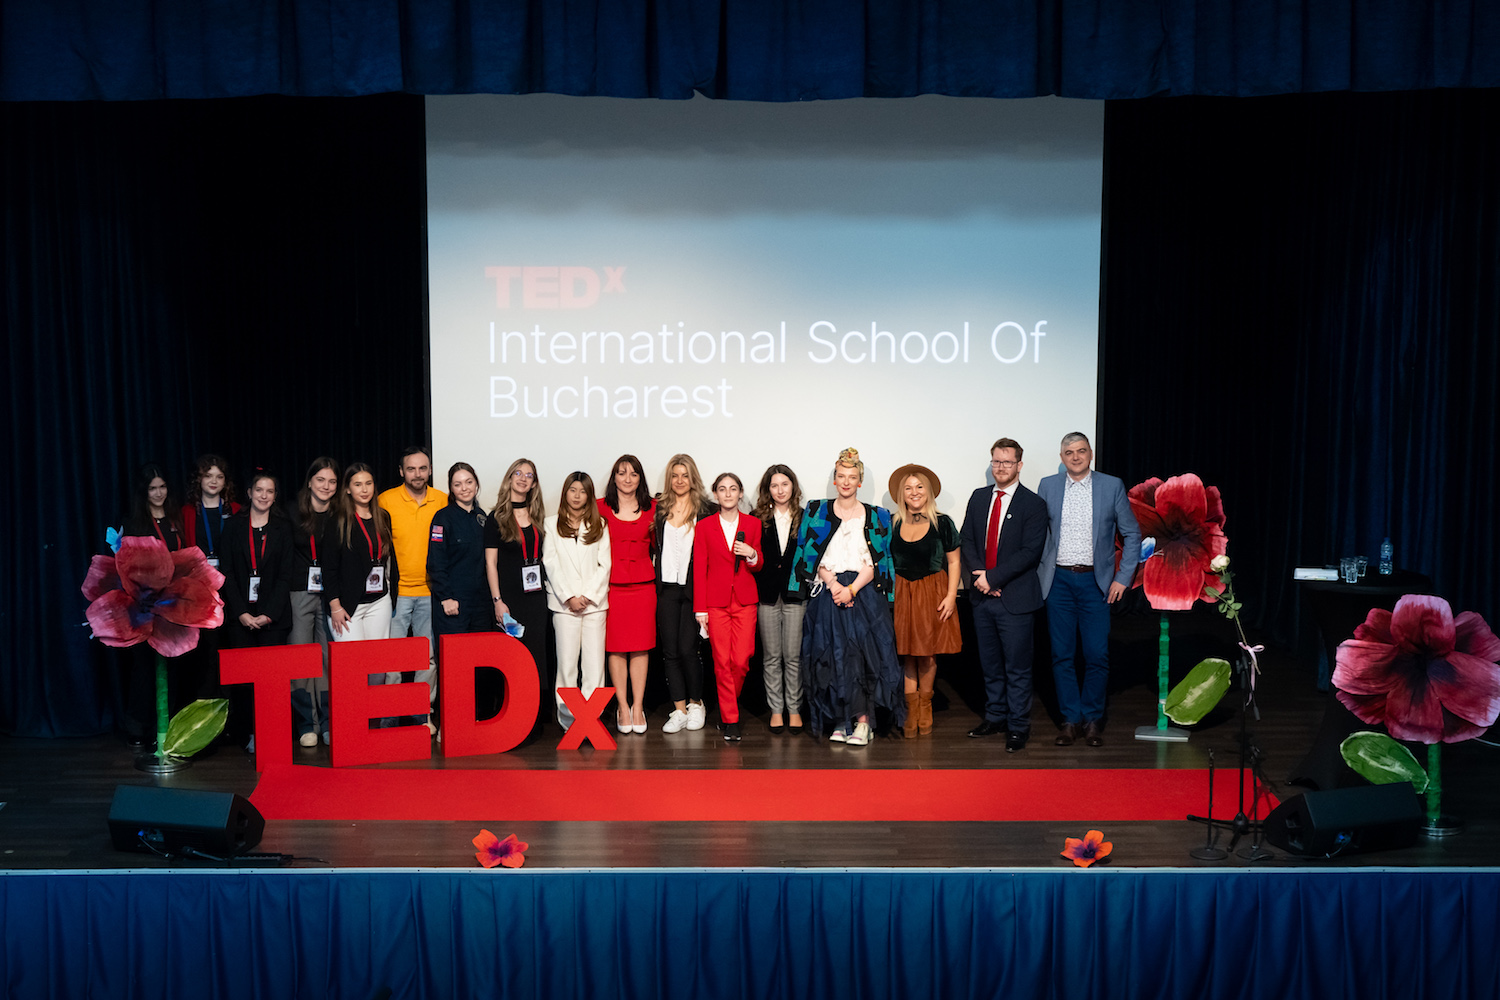 Behind the Scenes of the International School of Bucharest’s Student’s Led TEDx